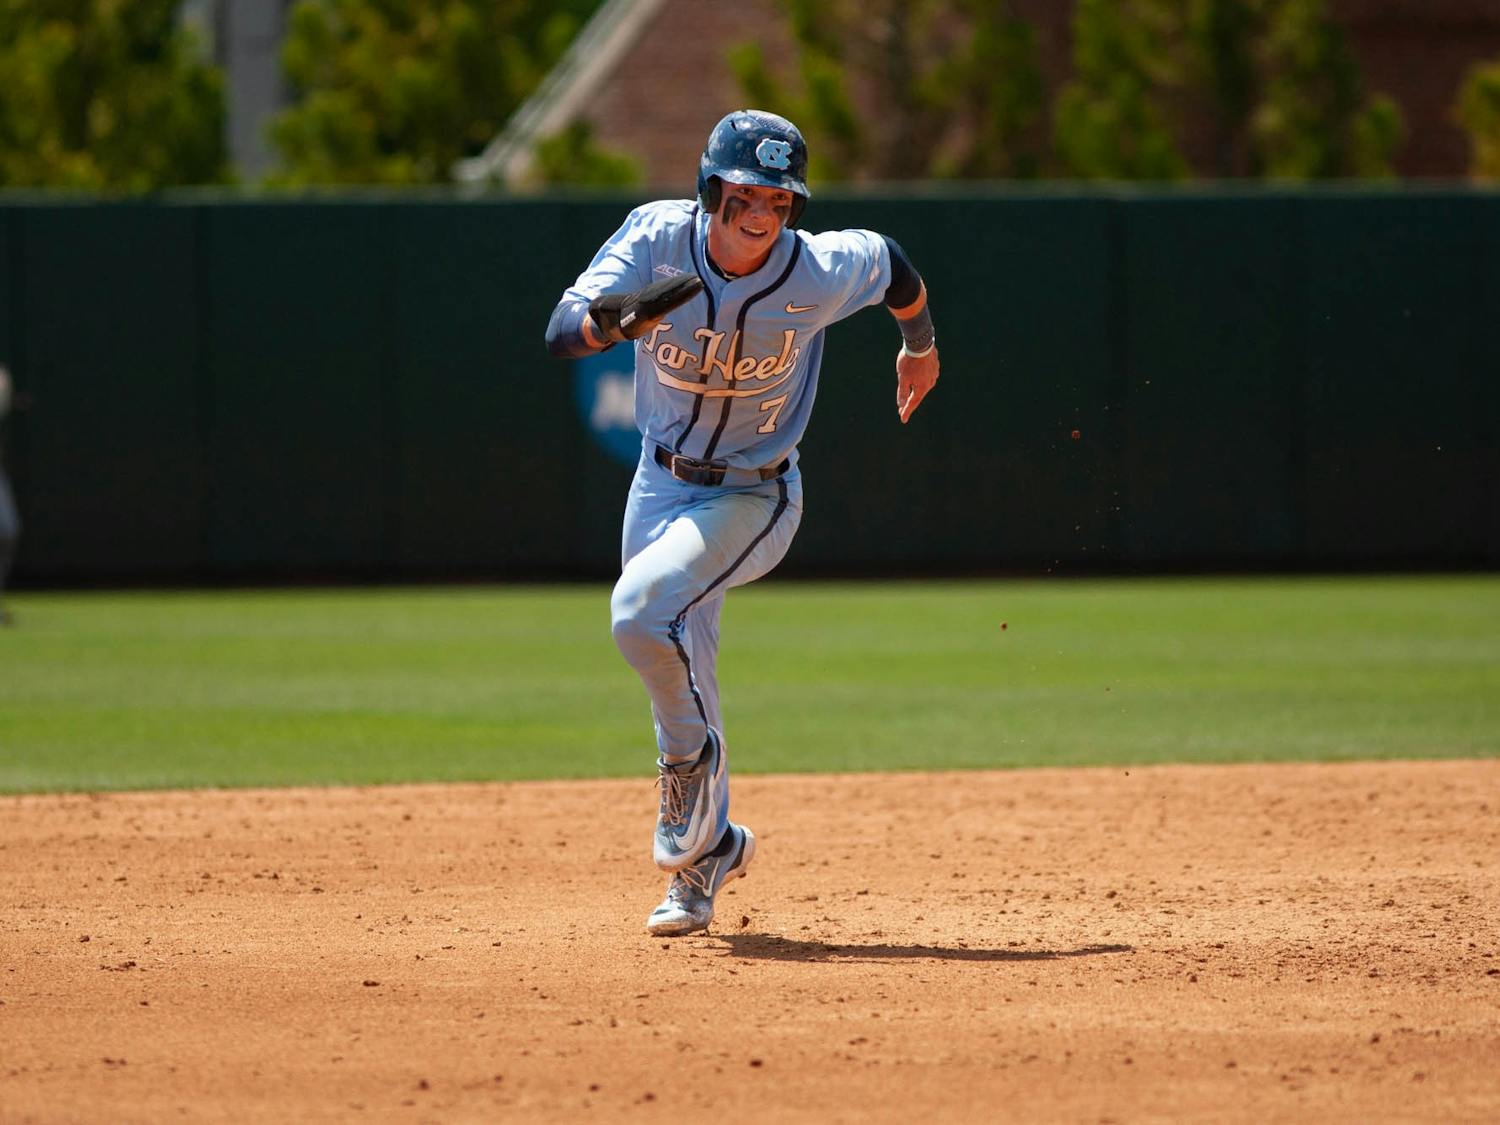 Sophomore outfielder Vance Honeycutt (7) runs to third base during the baseball game against Boston College on Sunday, April 23, 2023, at Boshamer Stadium. UNC fell to Boston College 2-6.